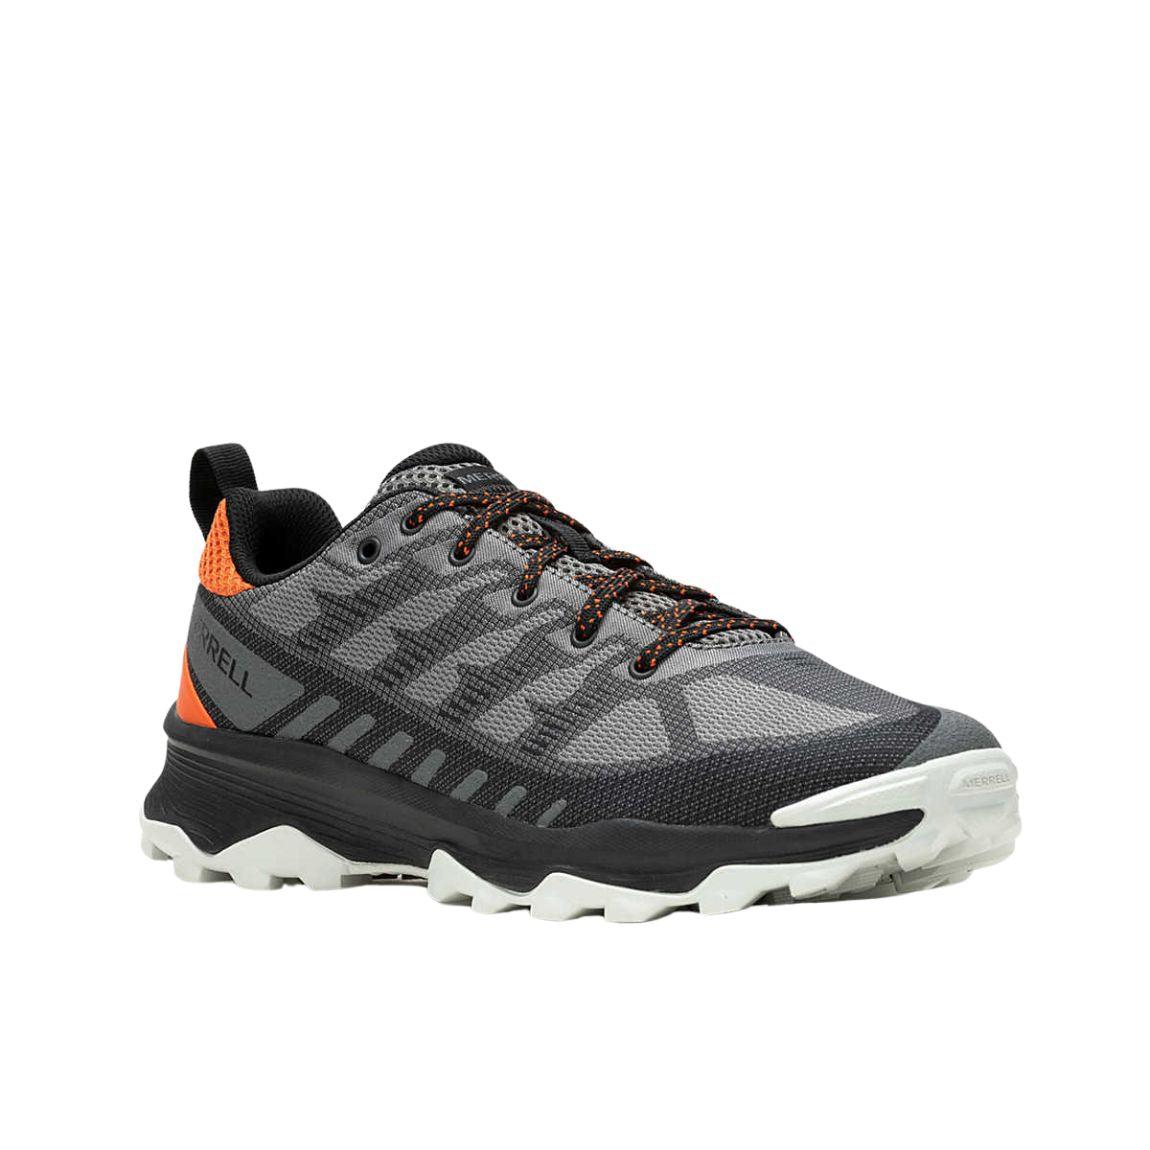 Merrell Speed Eco Hiking Shoes - Men